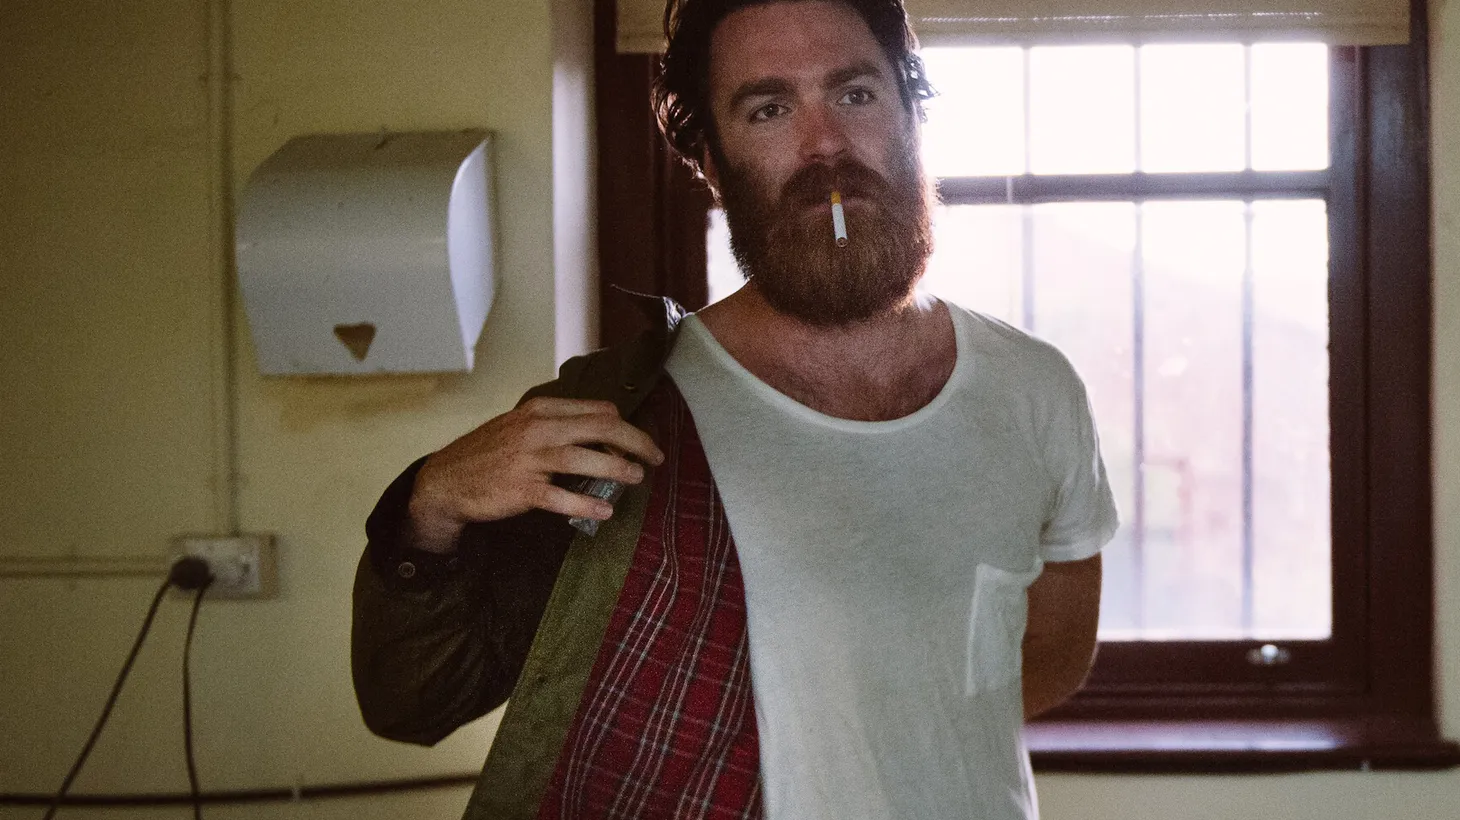 Australian producer/singer Chet Faker has been a KCRW favorite for years and we hosted him for a live session around the release of his full length debut in 2014.